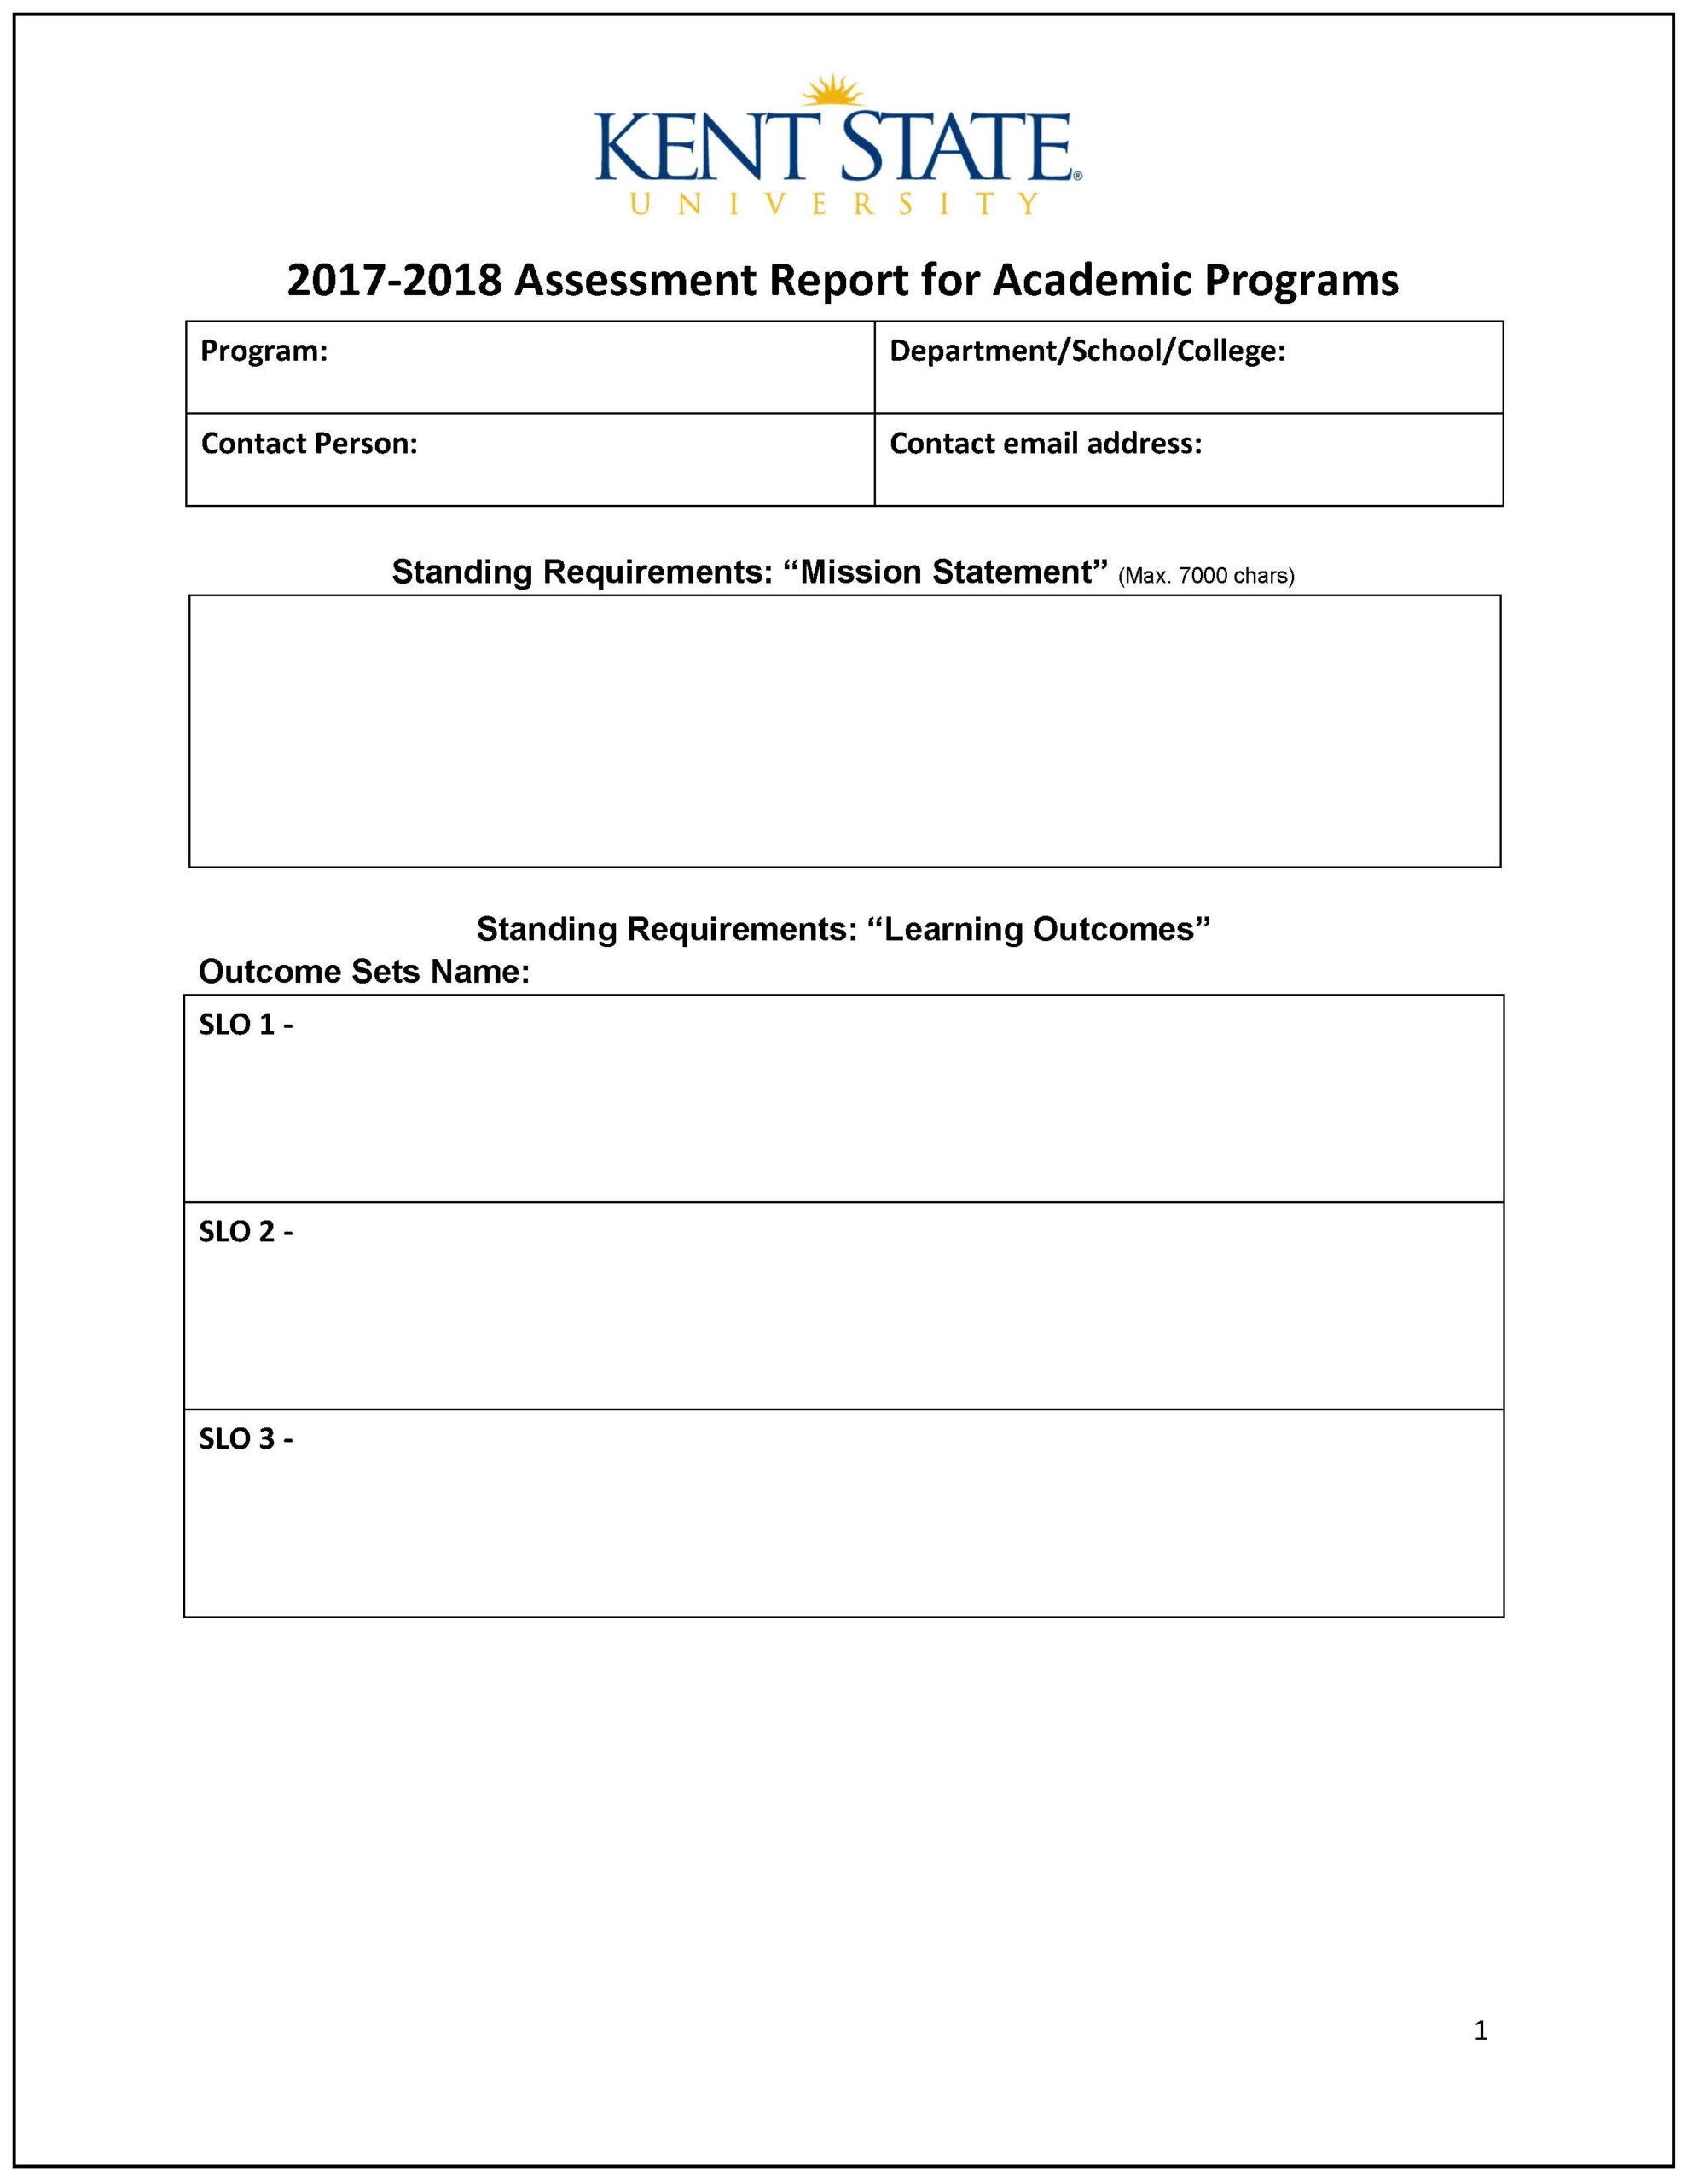 Assessment Report - Word Template  Kent State University Inside Template For Evaluation Report